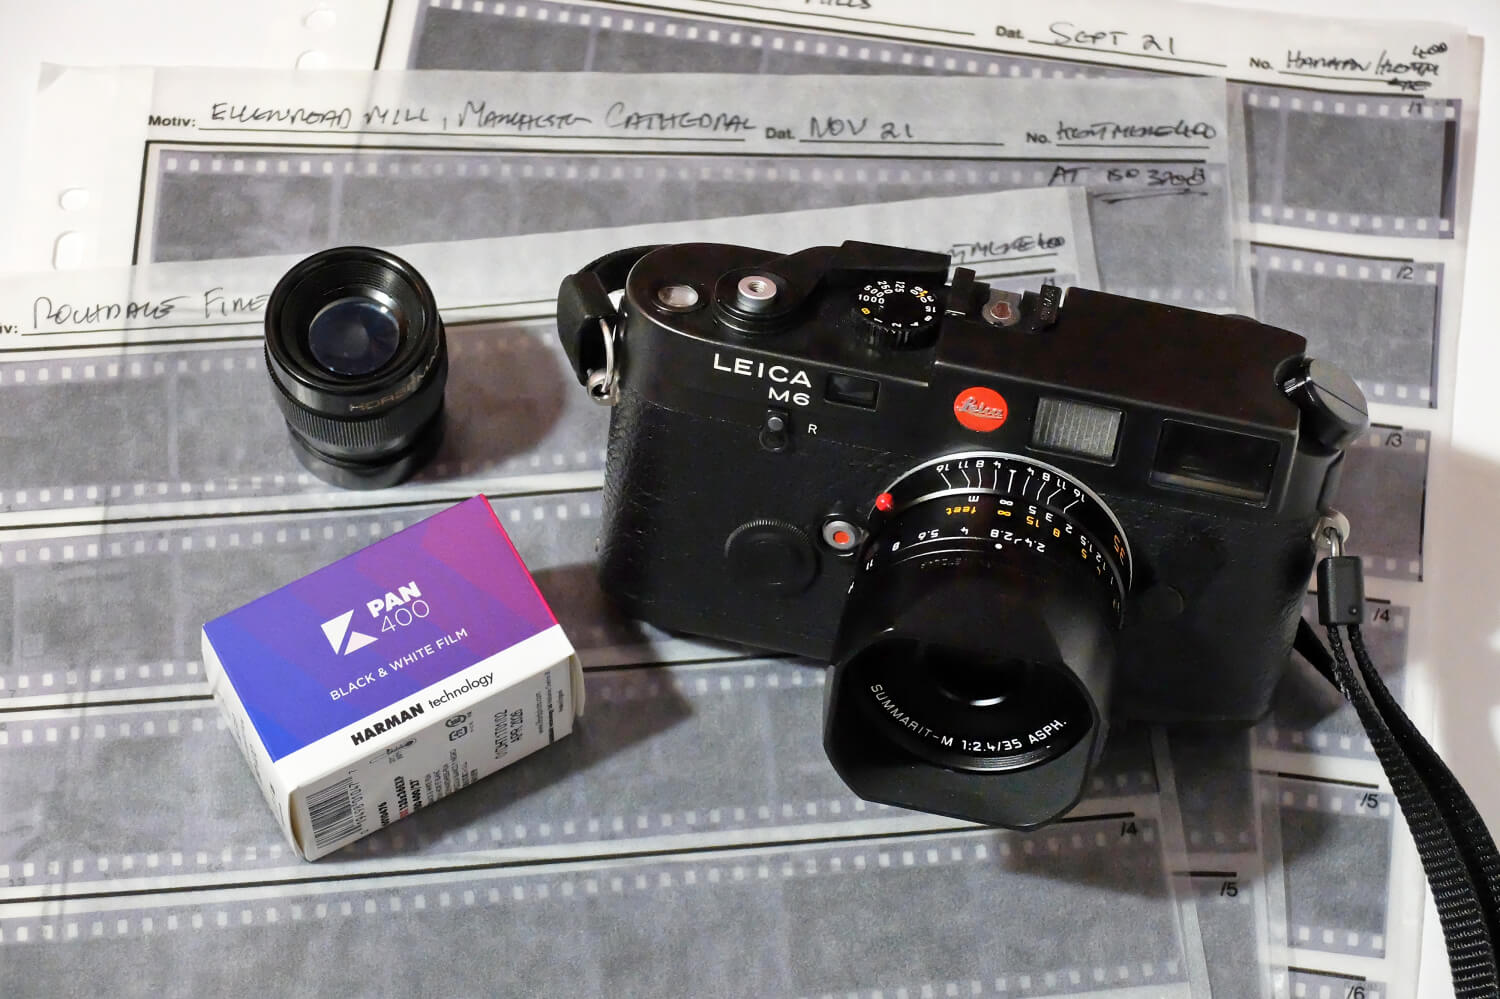 Kentmere Pan 400 at EI3200 – A low-cost, high speed alternative?